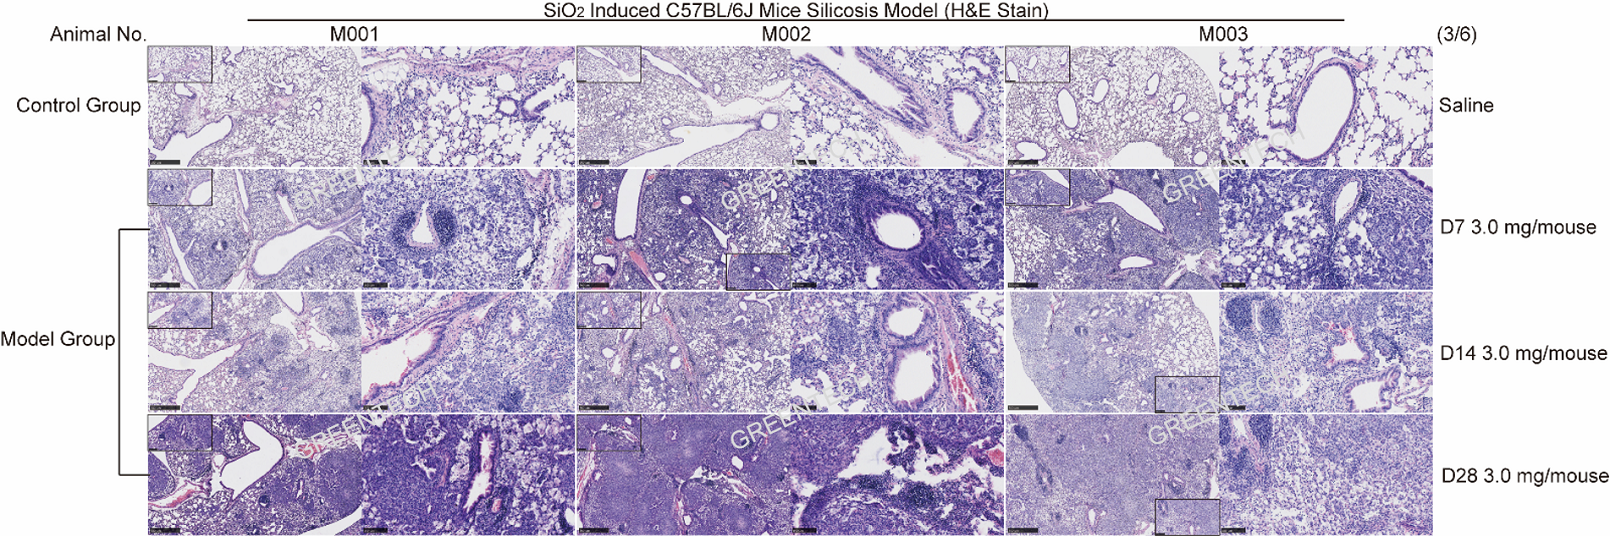 Lung section staining of silicon induced lung fibrosis model in mice.png